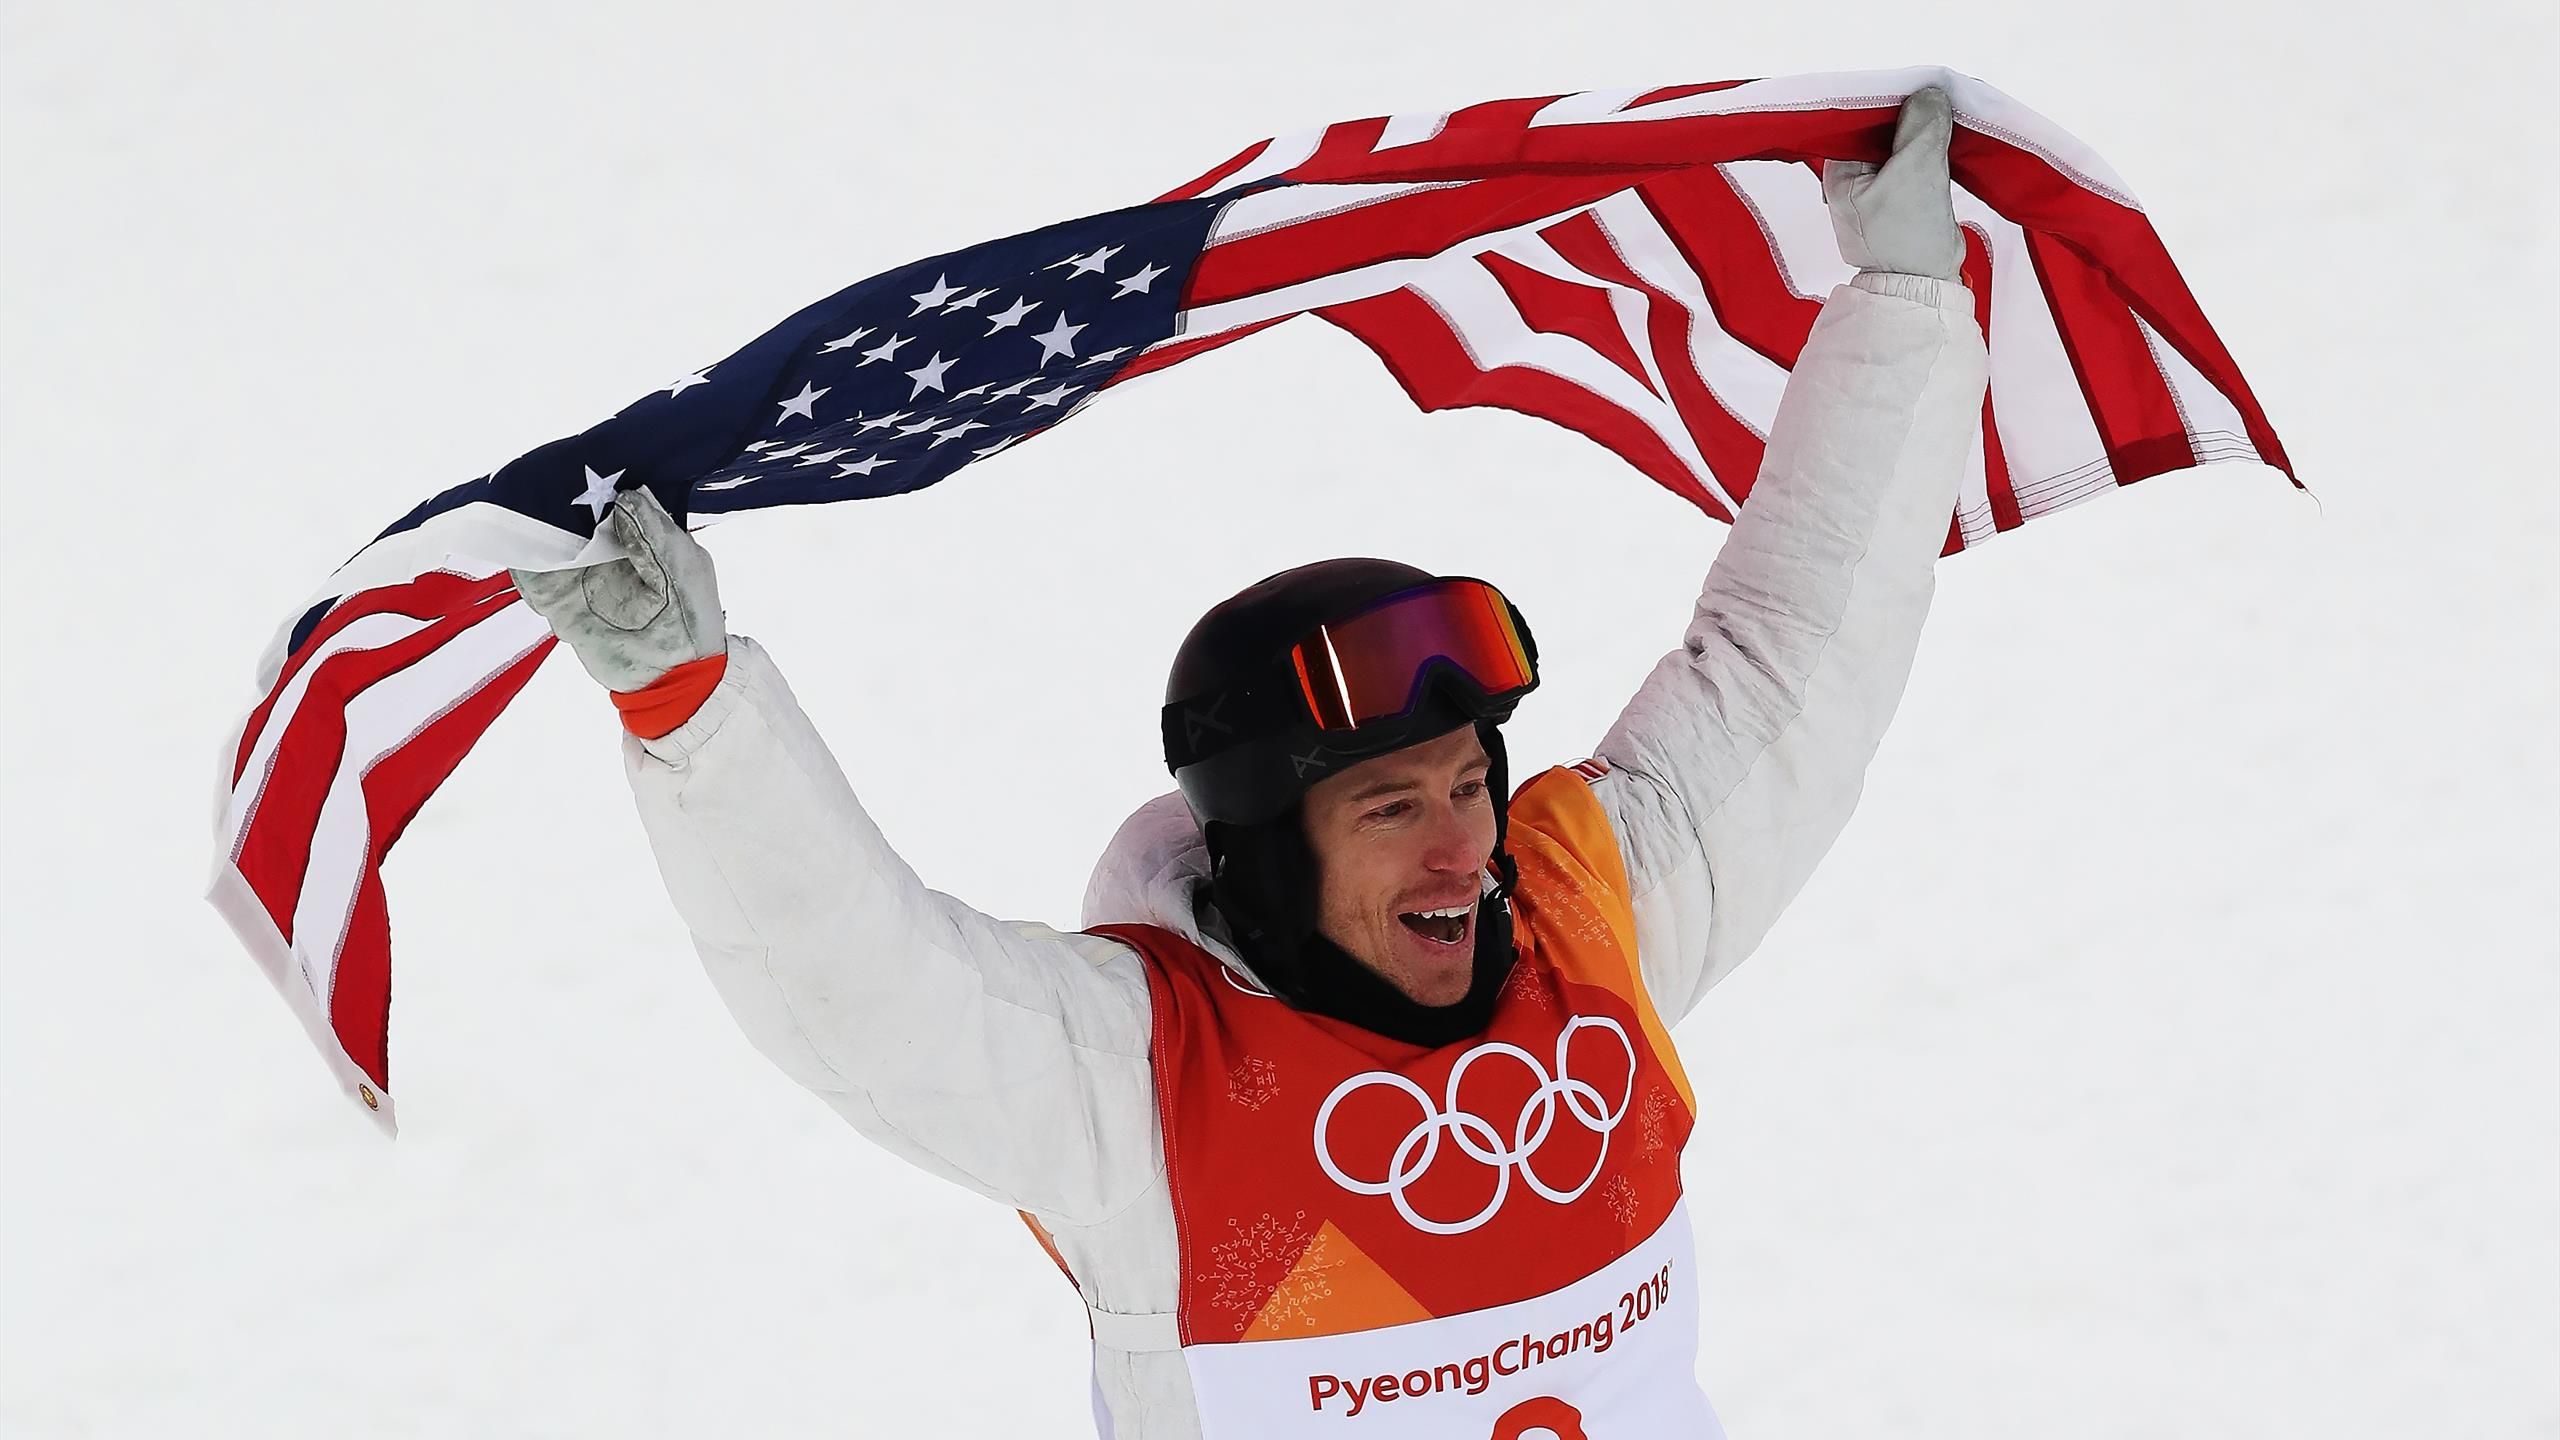 Shaun White will have a final shot at gold.